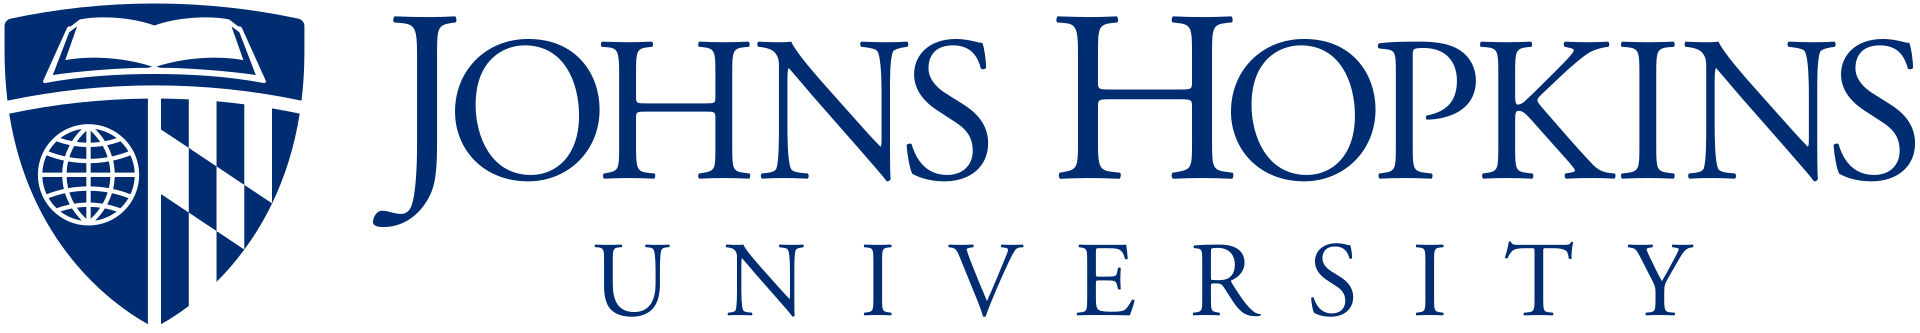 Johns Hopkins University logo, By Source, Fair use, https://en.wikipedia.org/w/index.php?curid=52649215